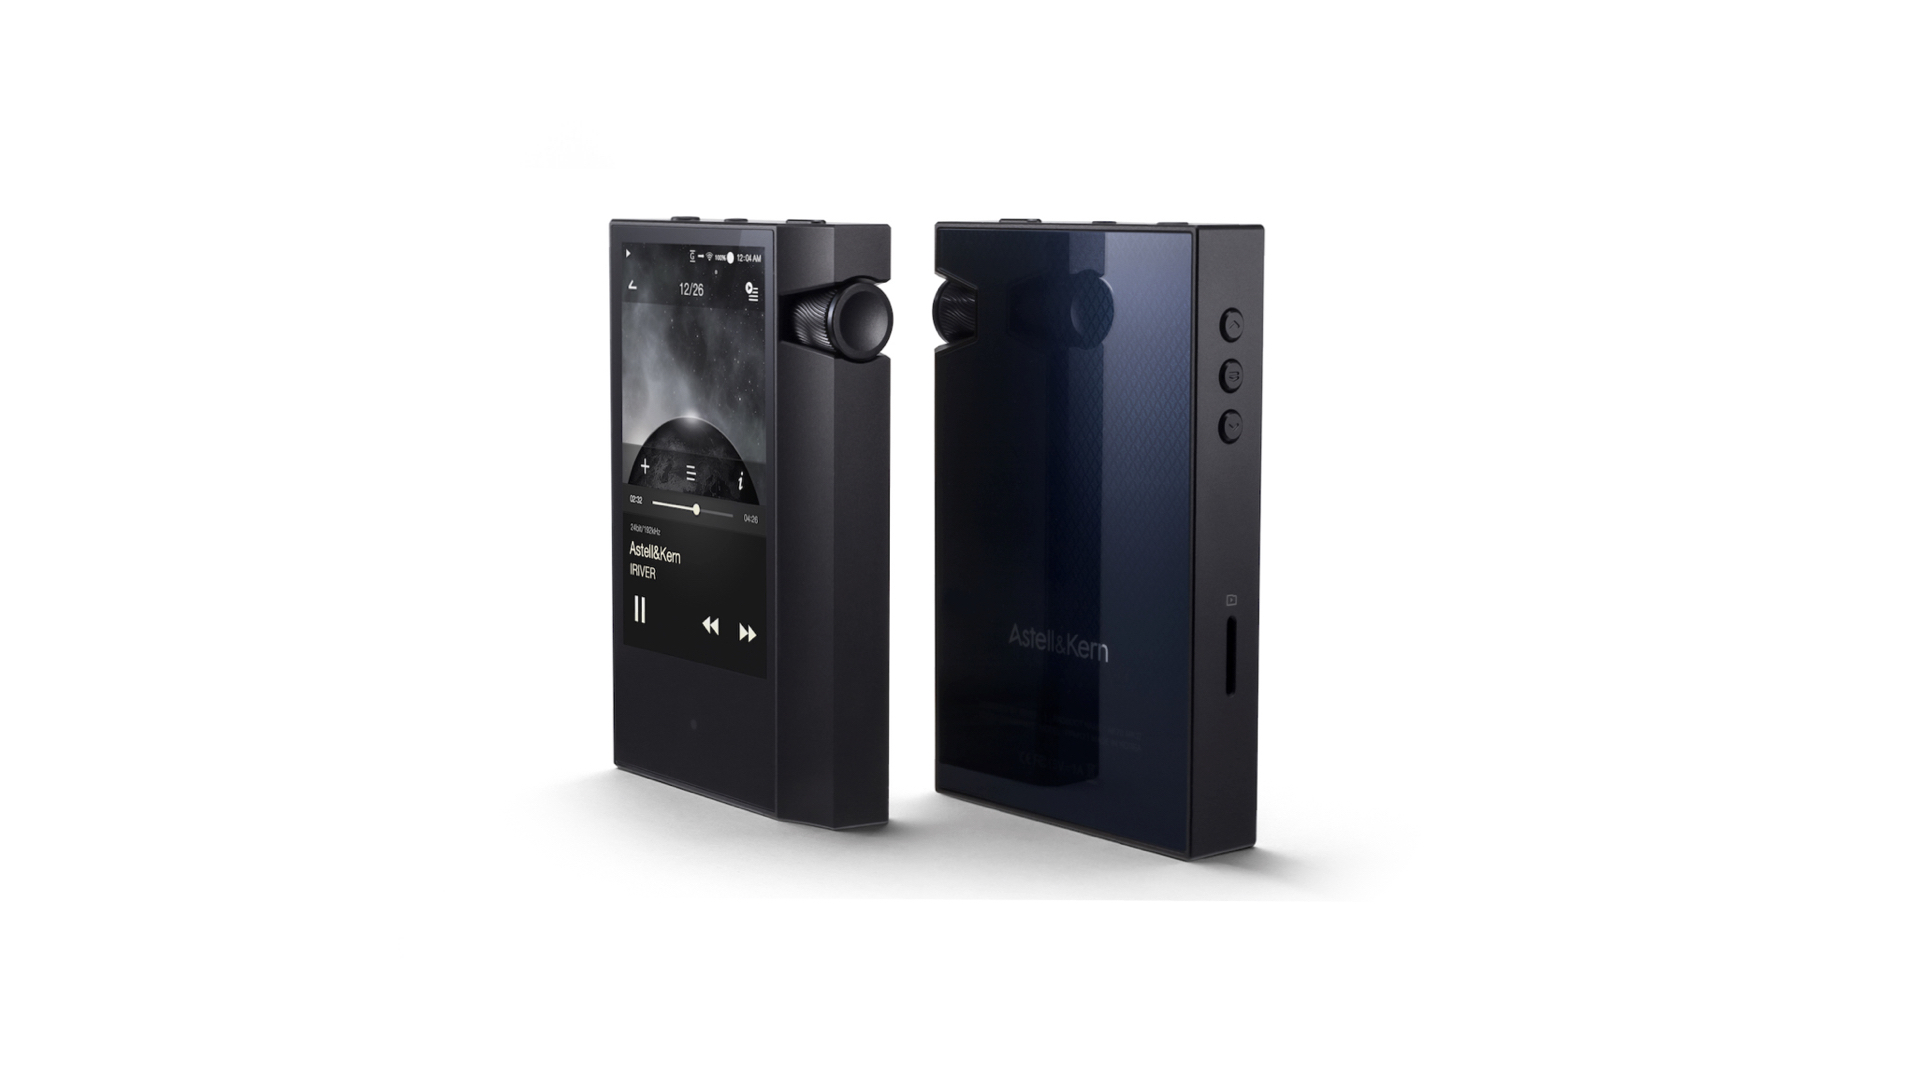 Astell&Kern AK70 MkII: The £600 portable music player | The Week